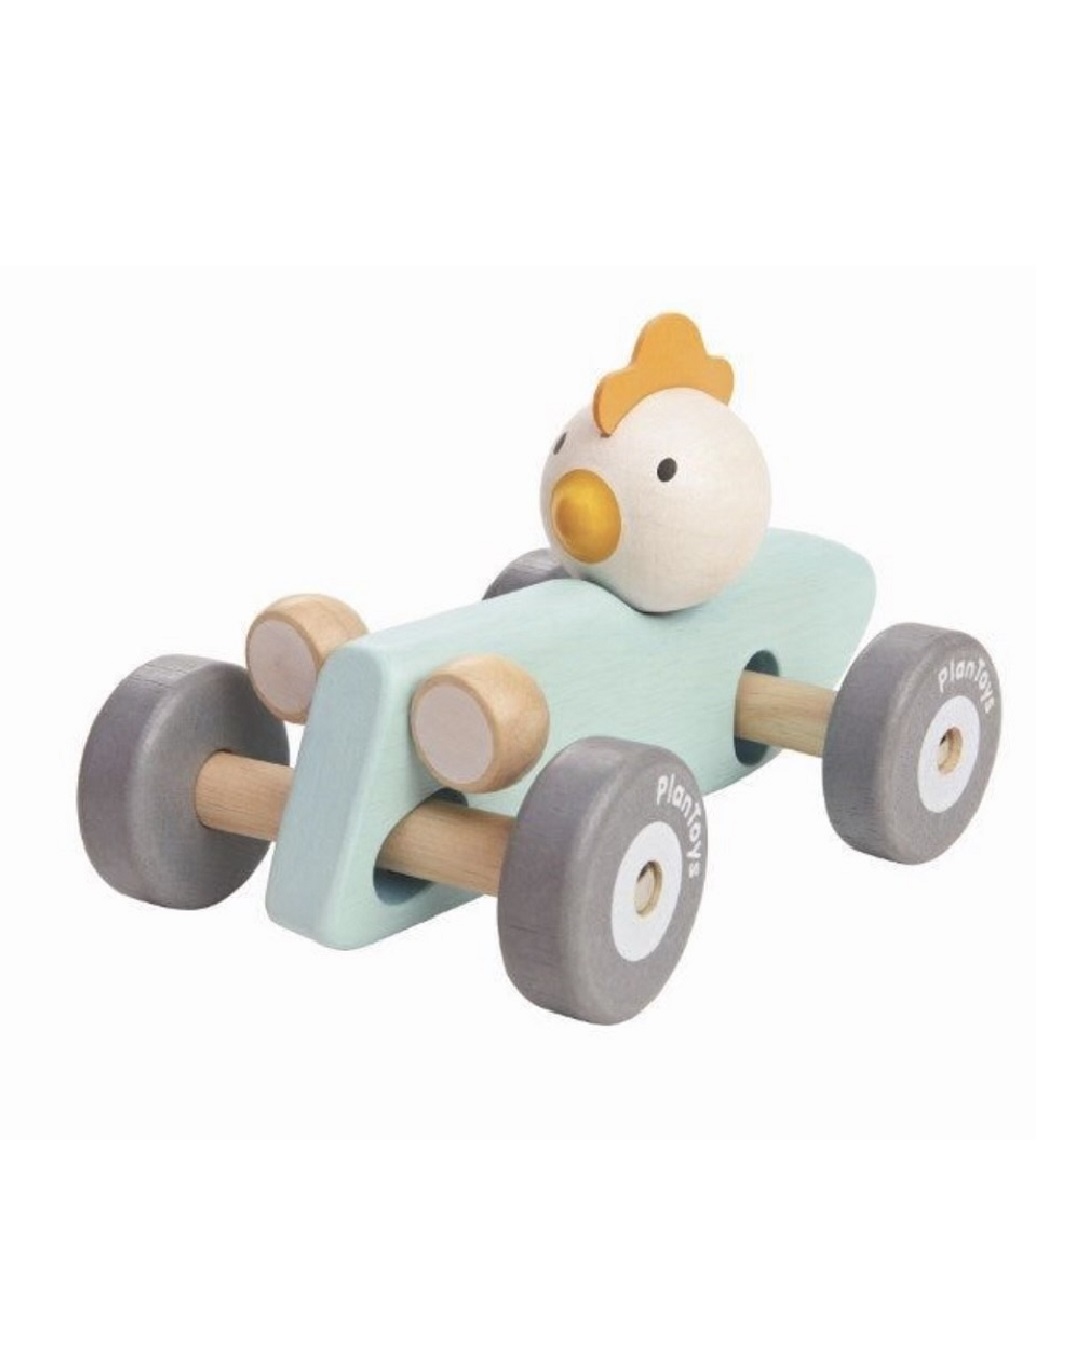 Chicken toy racing car